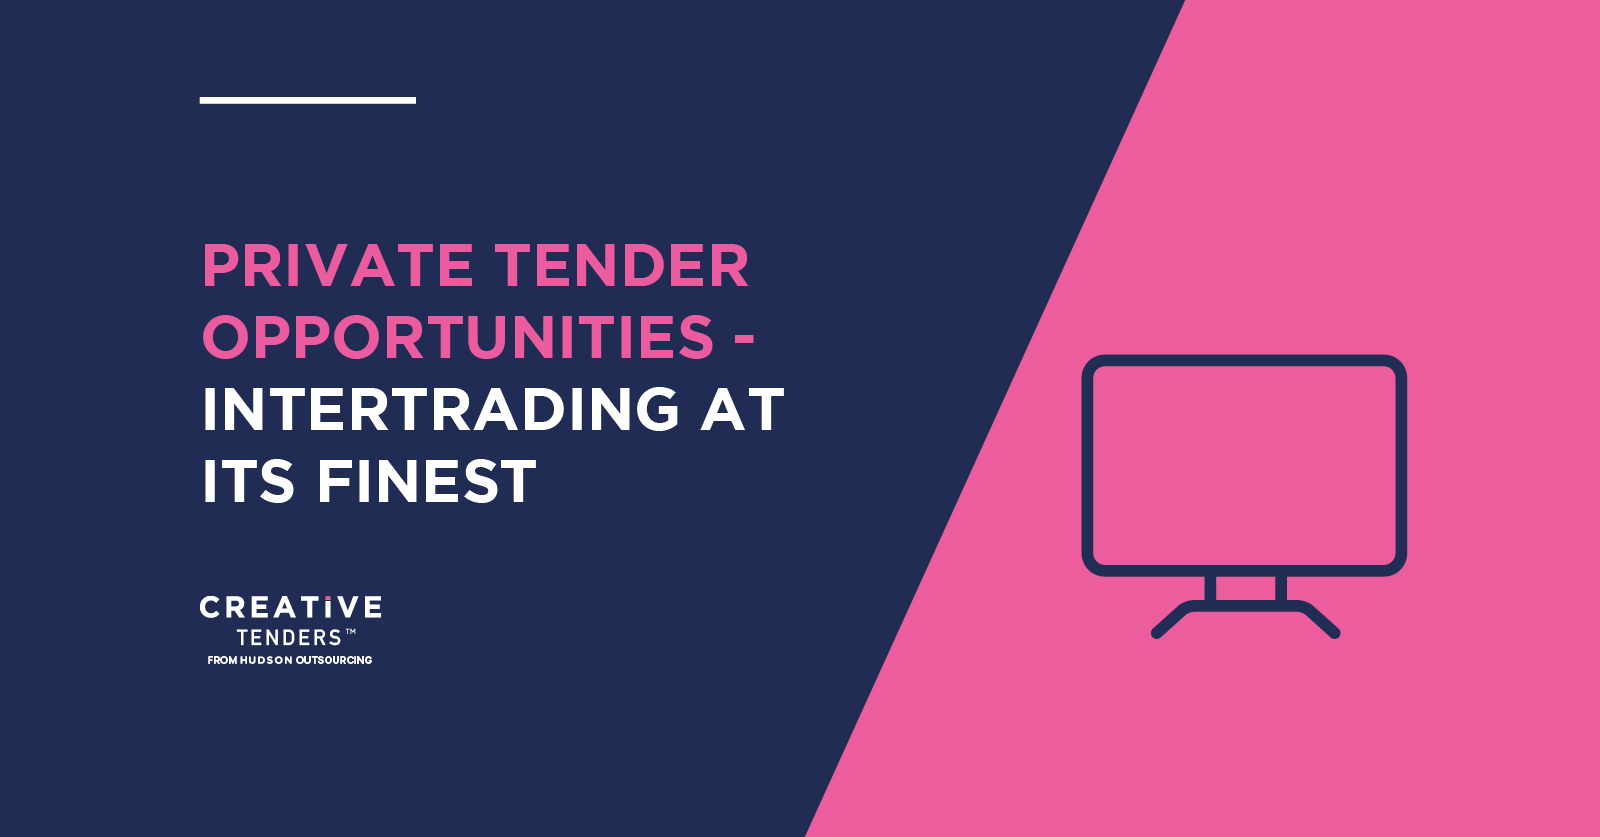 PRIVATE TENDER OPPORTUNITIES – Intertrading at its finest!